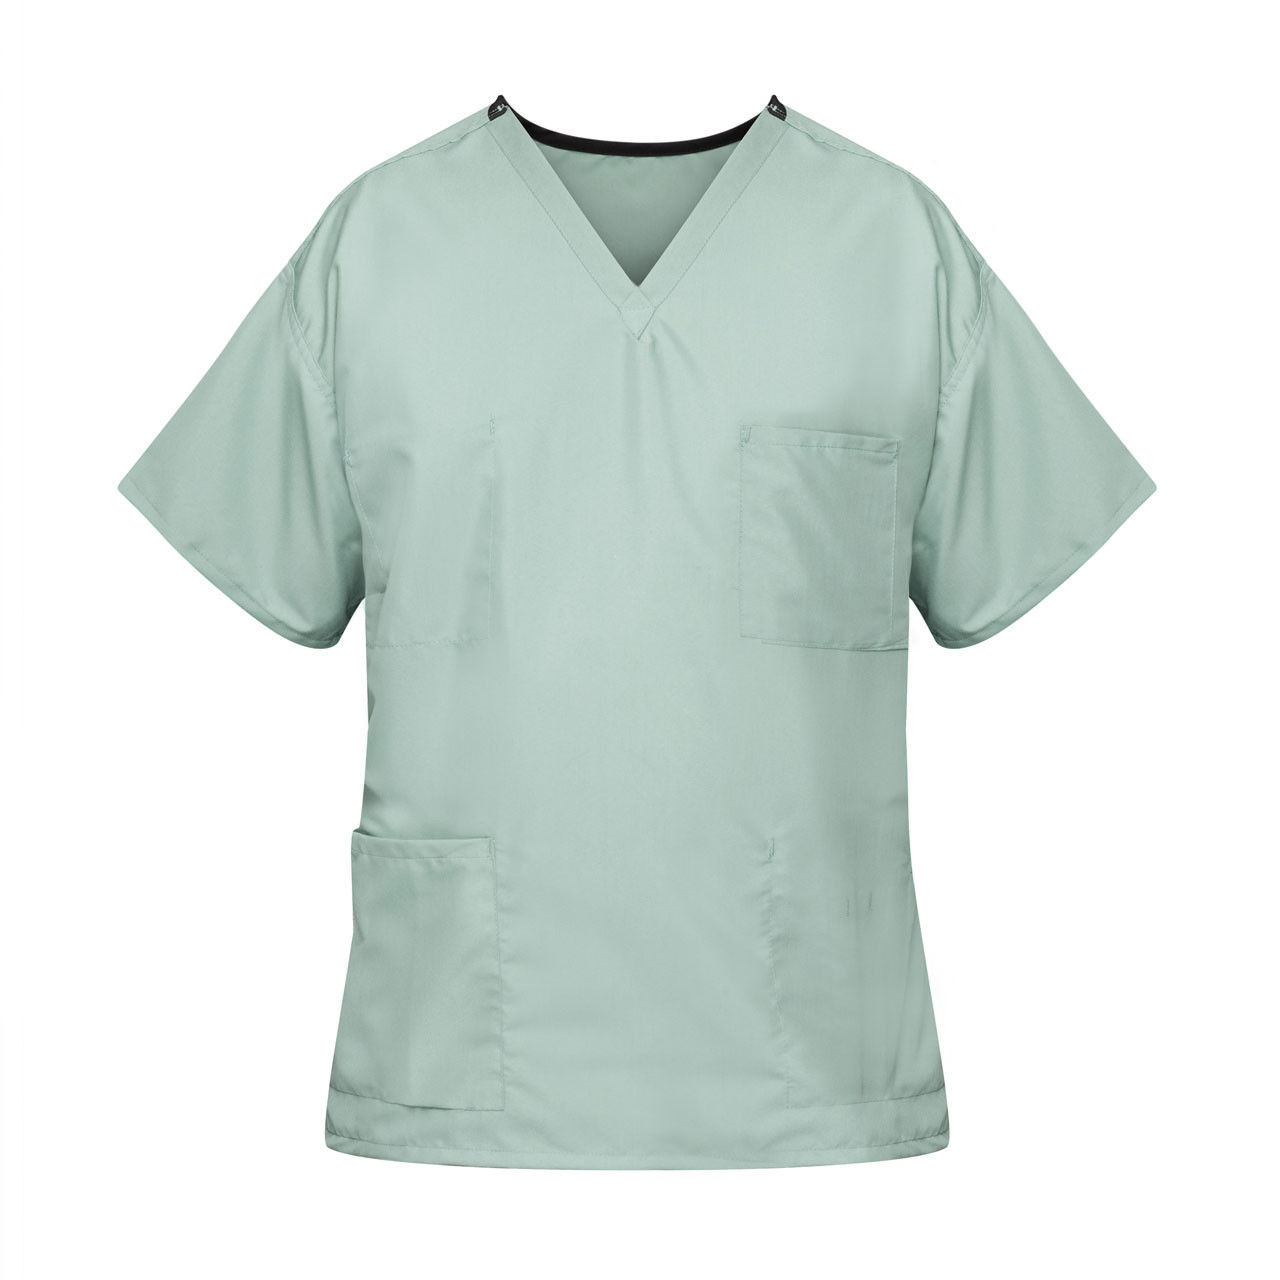 Within the misty green scrubs, where can the top front pocket be found?